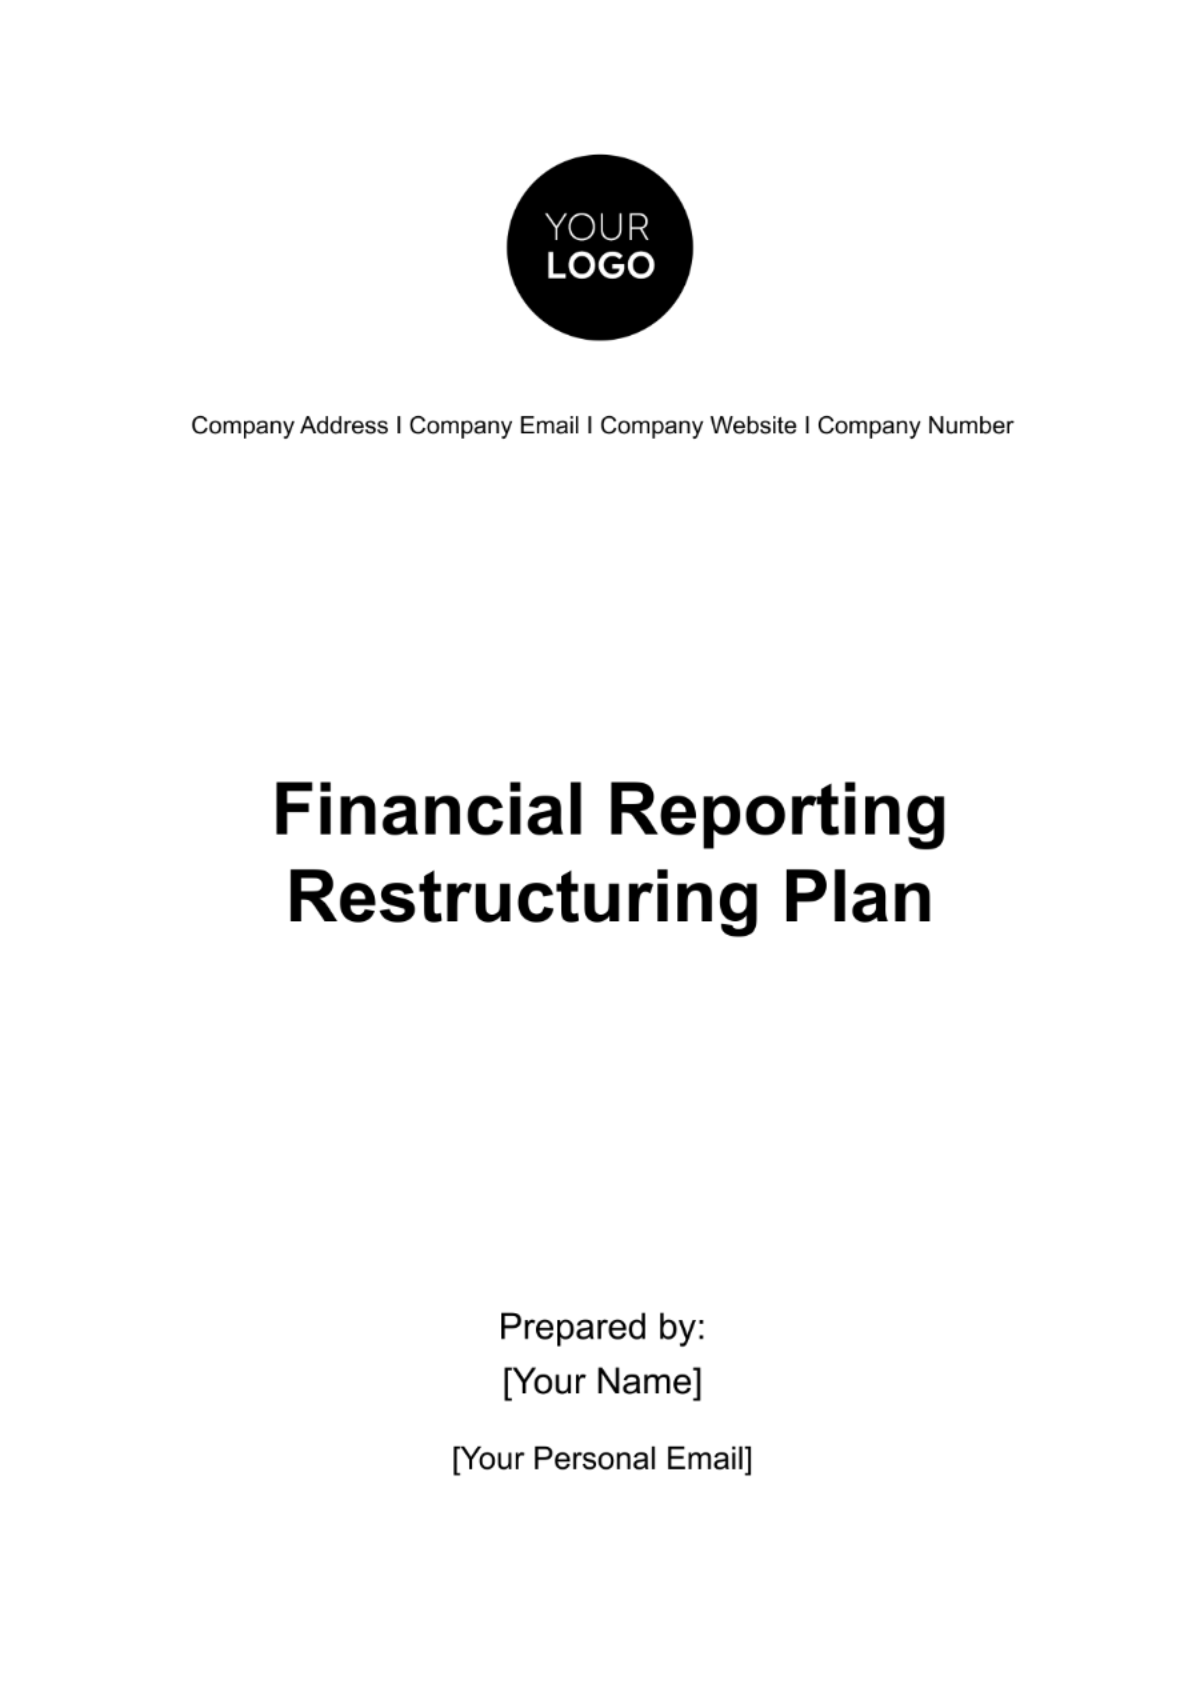 Free Financial Reporting Restructuring Plan Template